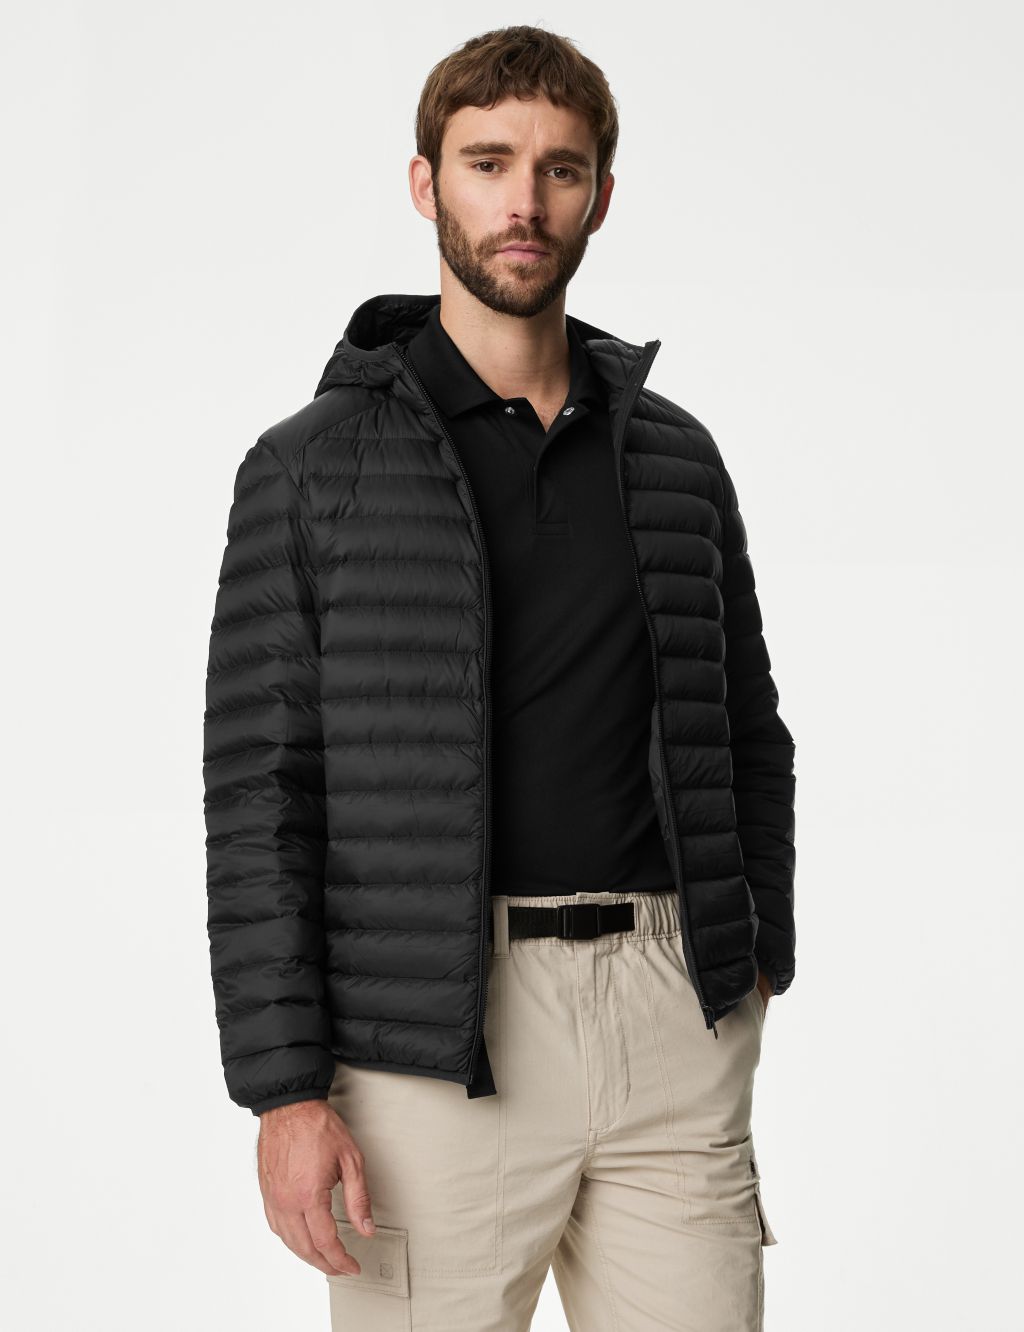 Feather and Down Jacket with Stormwear™ image 1